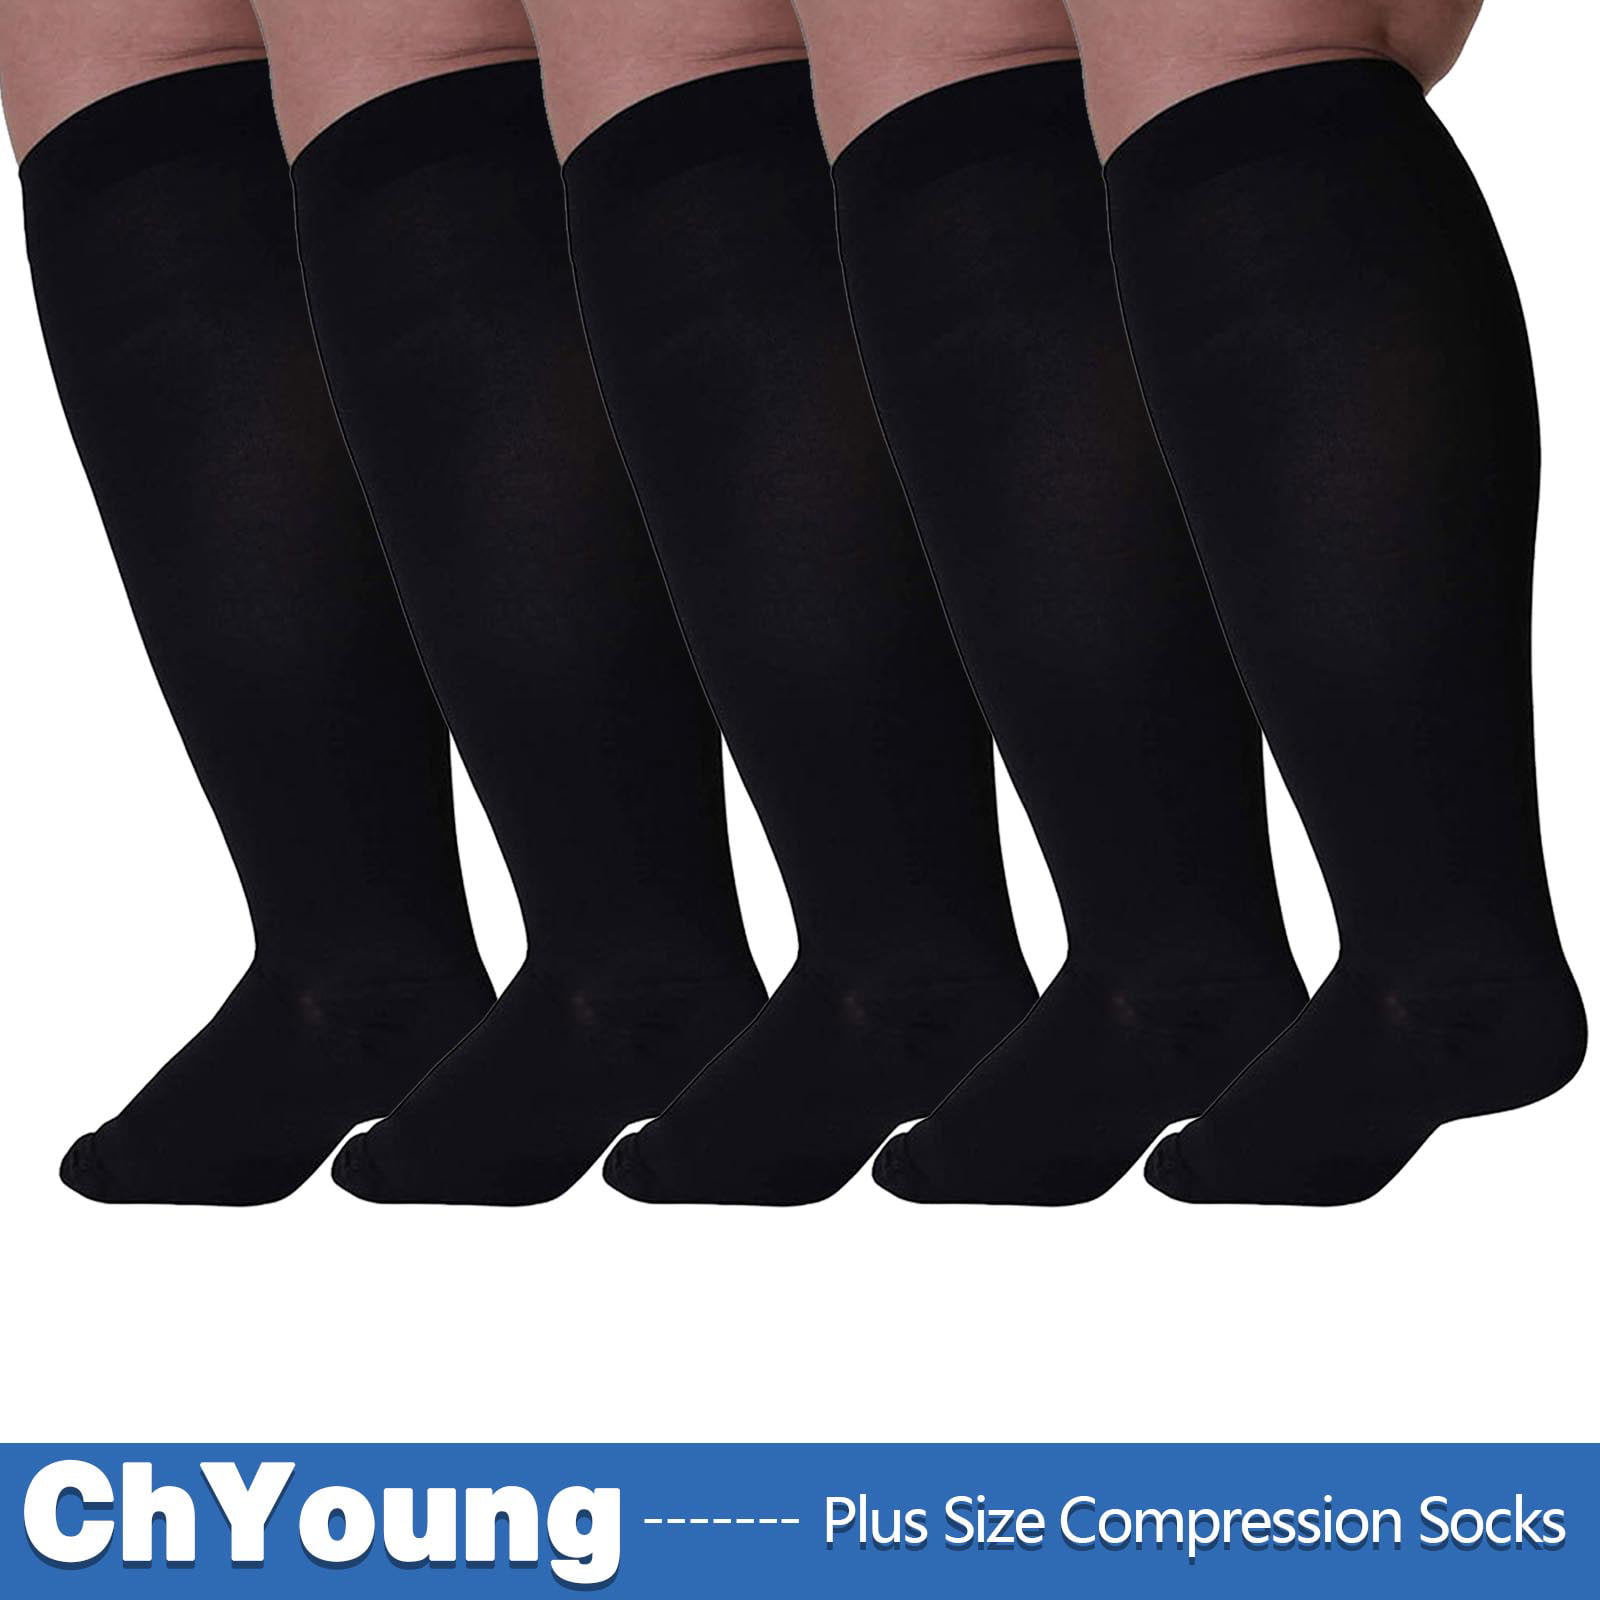 (5 Pack) Compression Socks 3XL for Plus Size Ankles and Extra Wide Calf ...